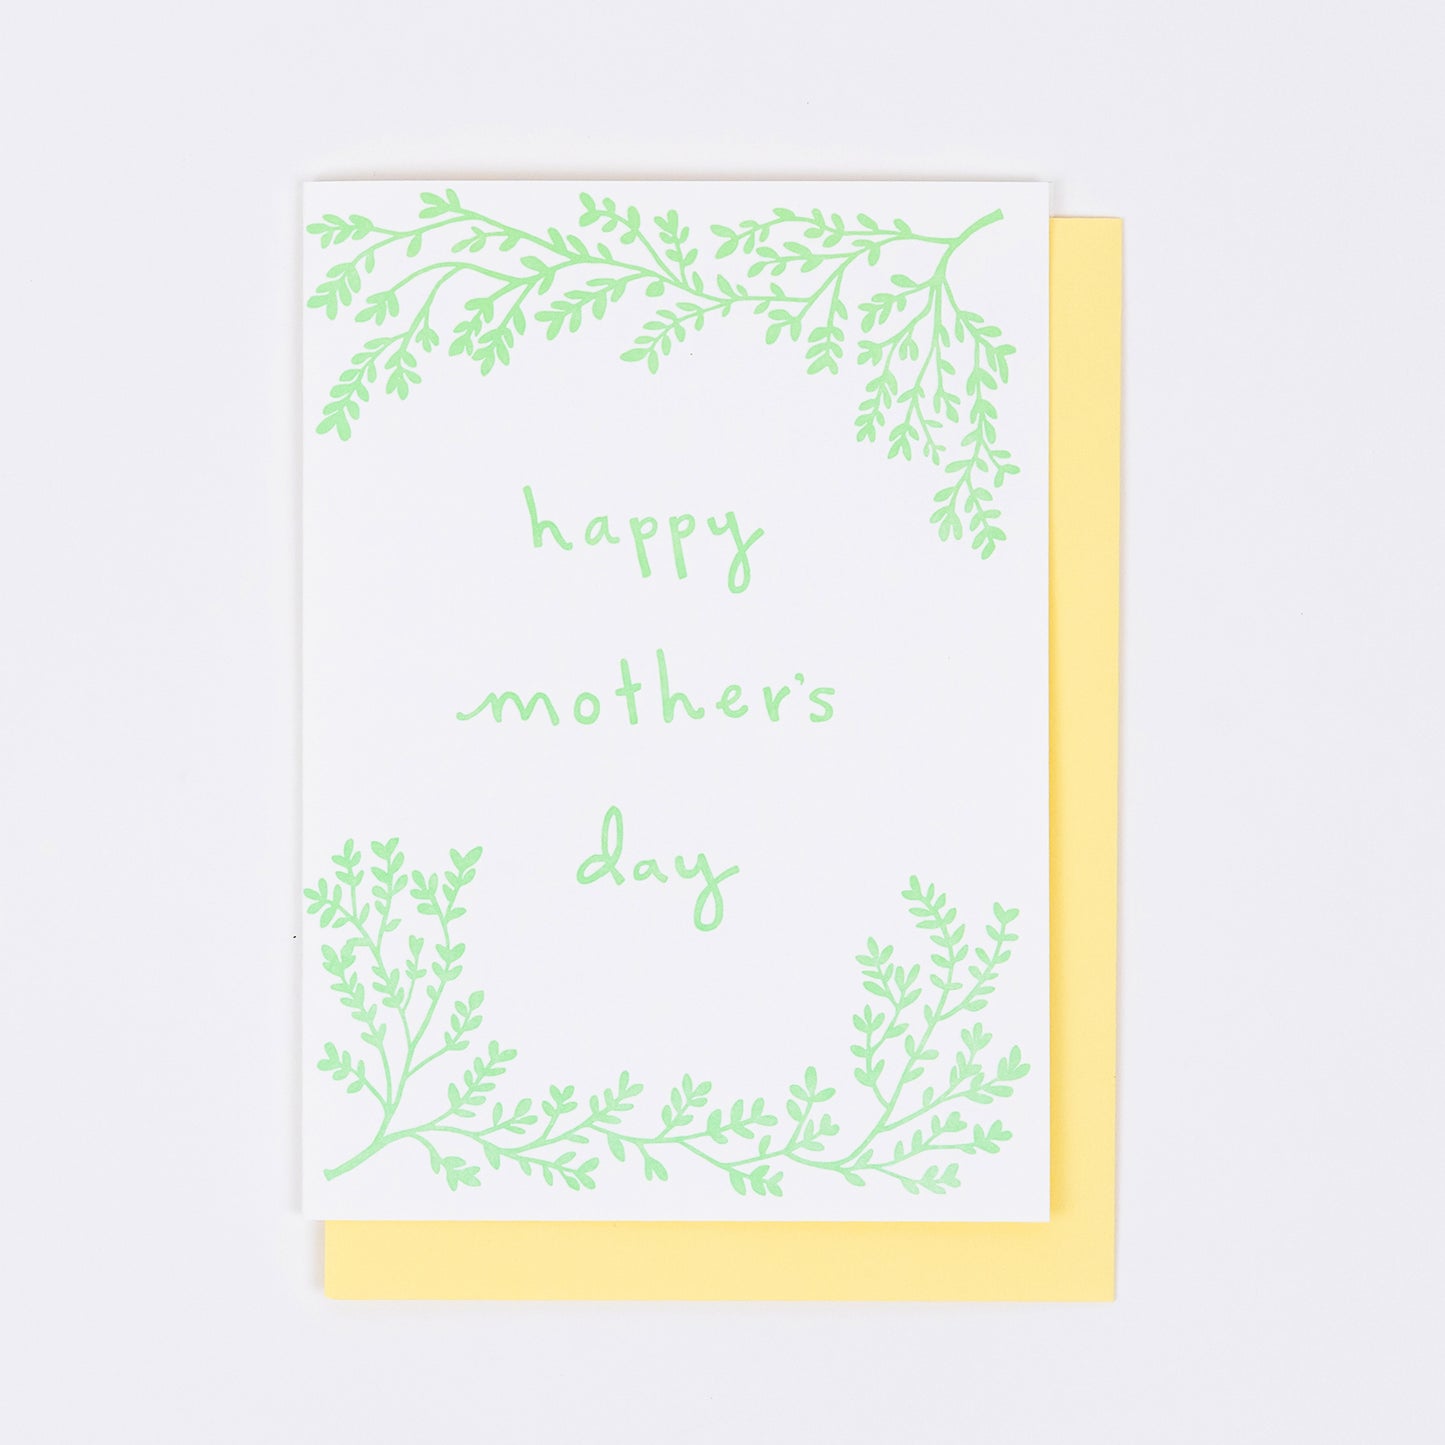 Letterpress greeting card featuring hand-drawn branches, printed in a soft minty green ink. The center of the card says "Happy Mother's Day" in a whimsical hand-drawn text, in the same minty green ink. The card is white, blank inside, and is paired with a warm yellow envelope.